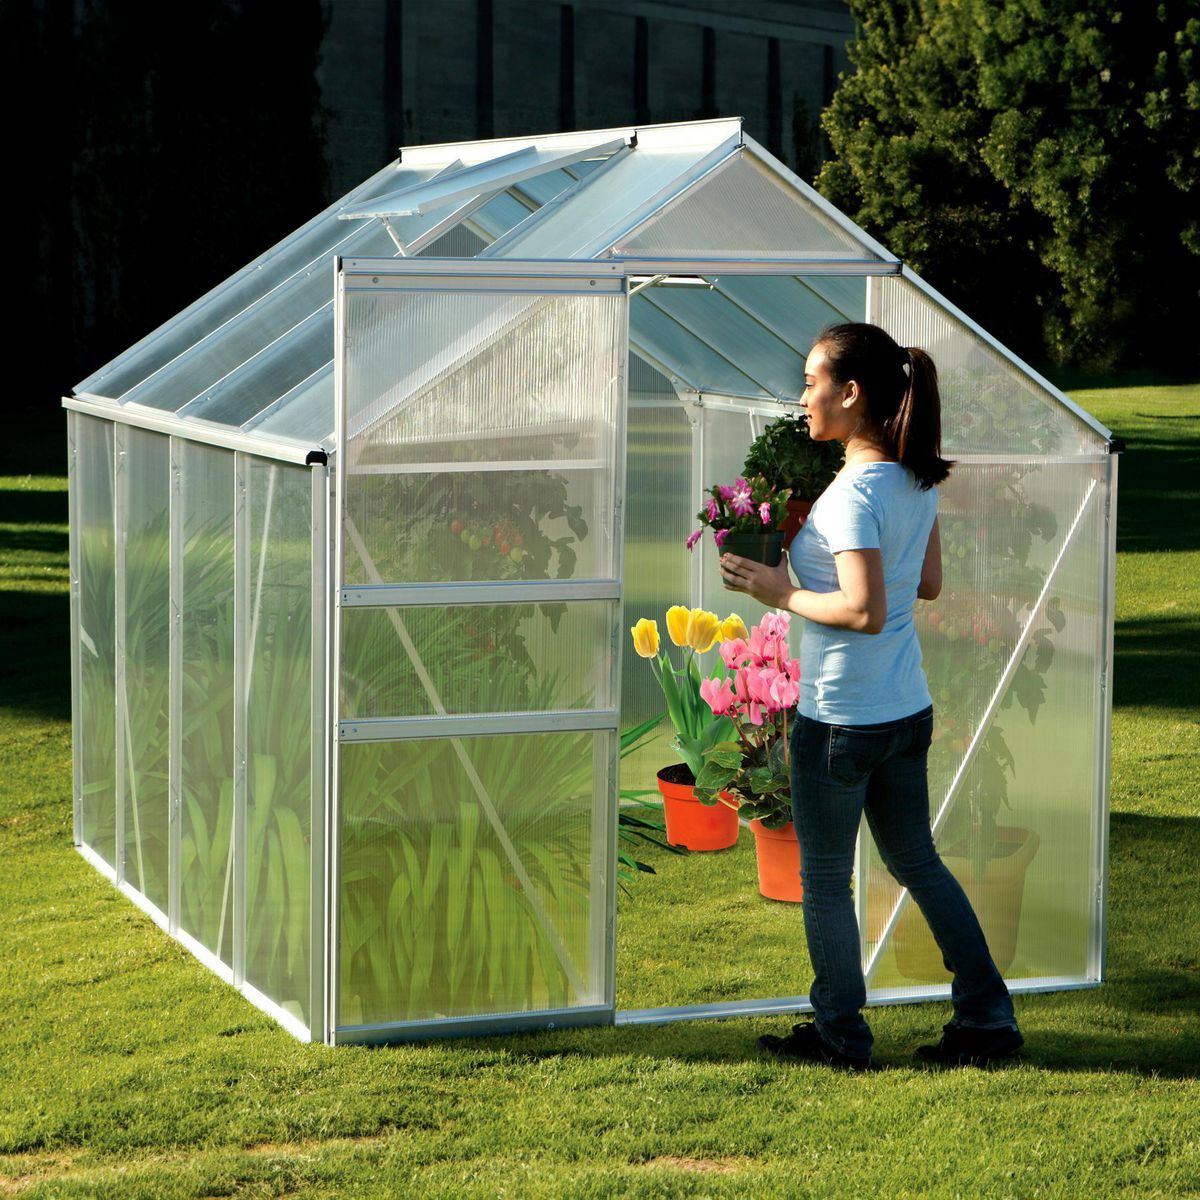 The Harbor Freight Greenhouse: A Sustainable Solution for Gardening Enthusiasts